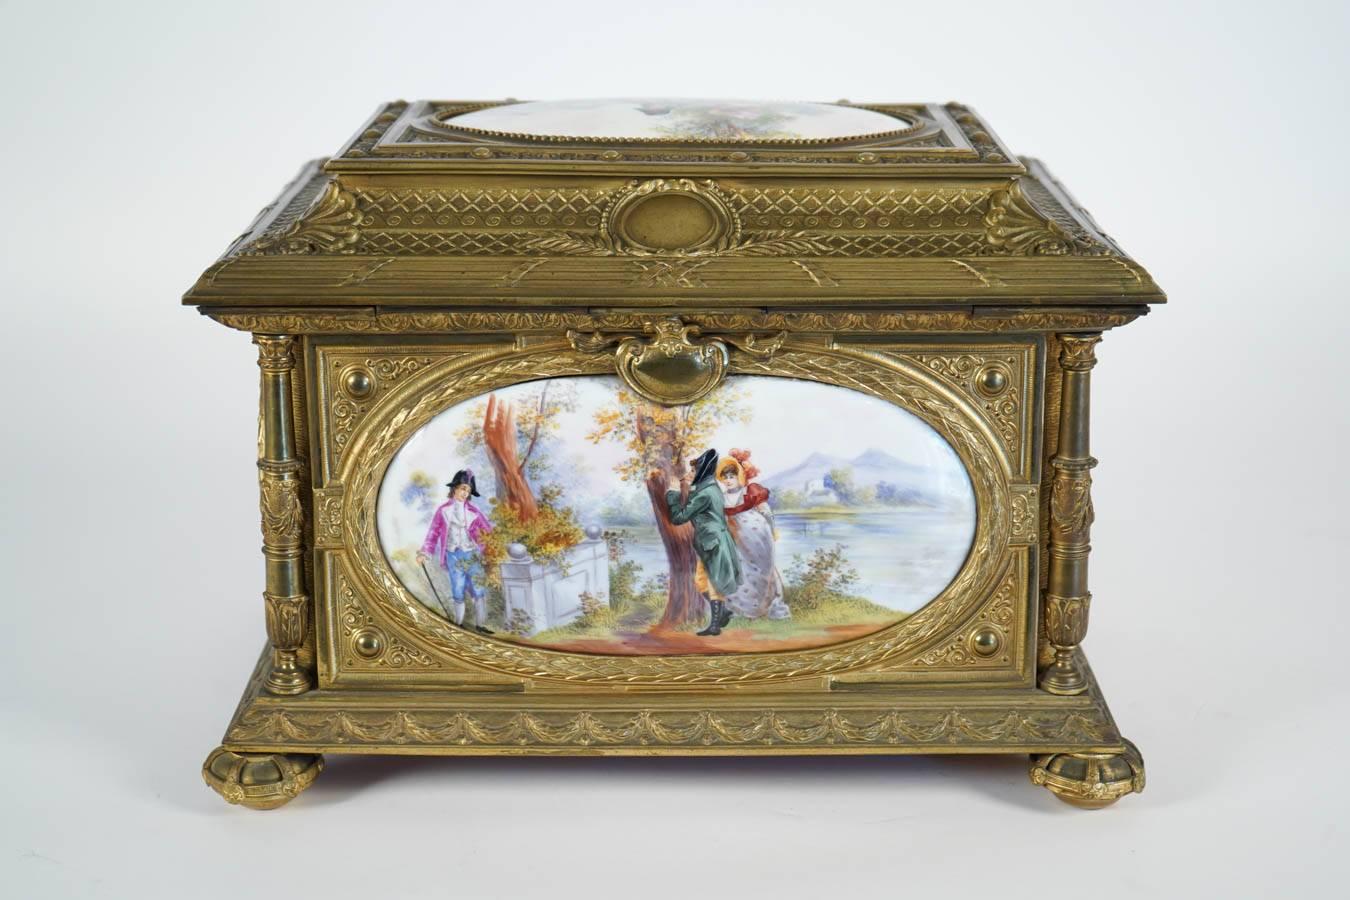 19th century large jewelry porcelain box with gilt bronze mounts.
This box features five hand painted porcelain plaques with stunning gilt bronze framework
each porcelain plaque is representing different scenes.